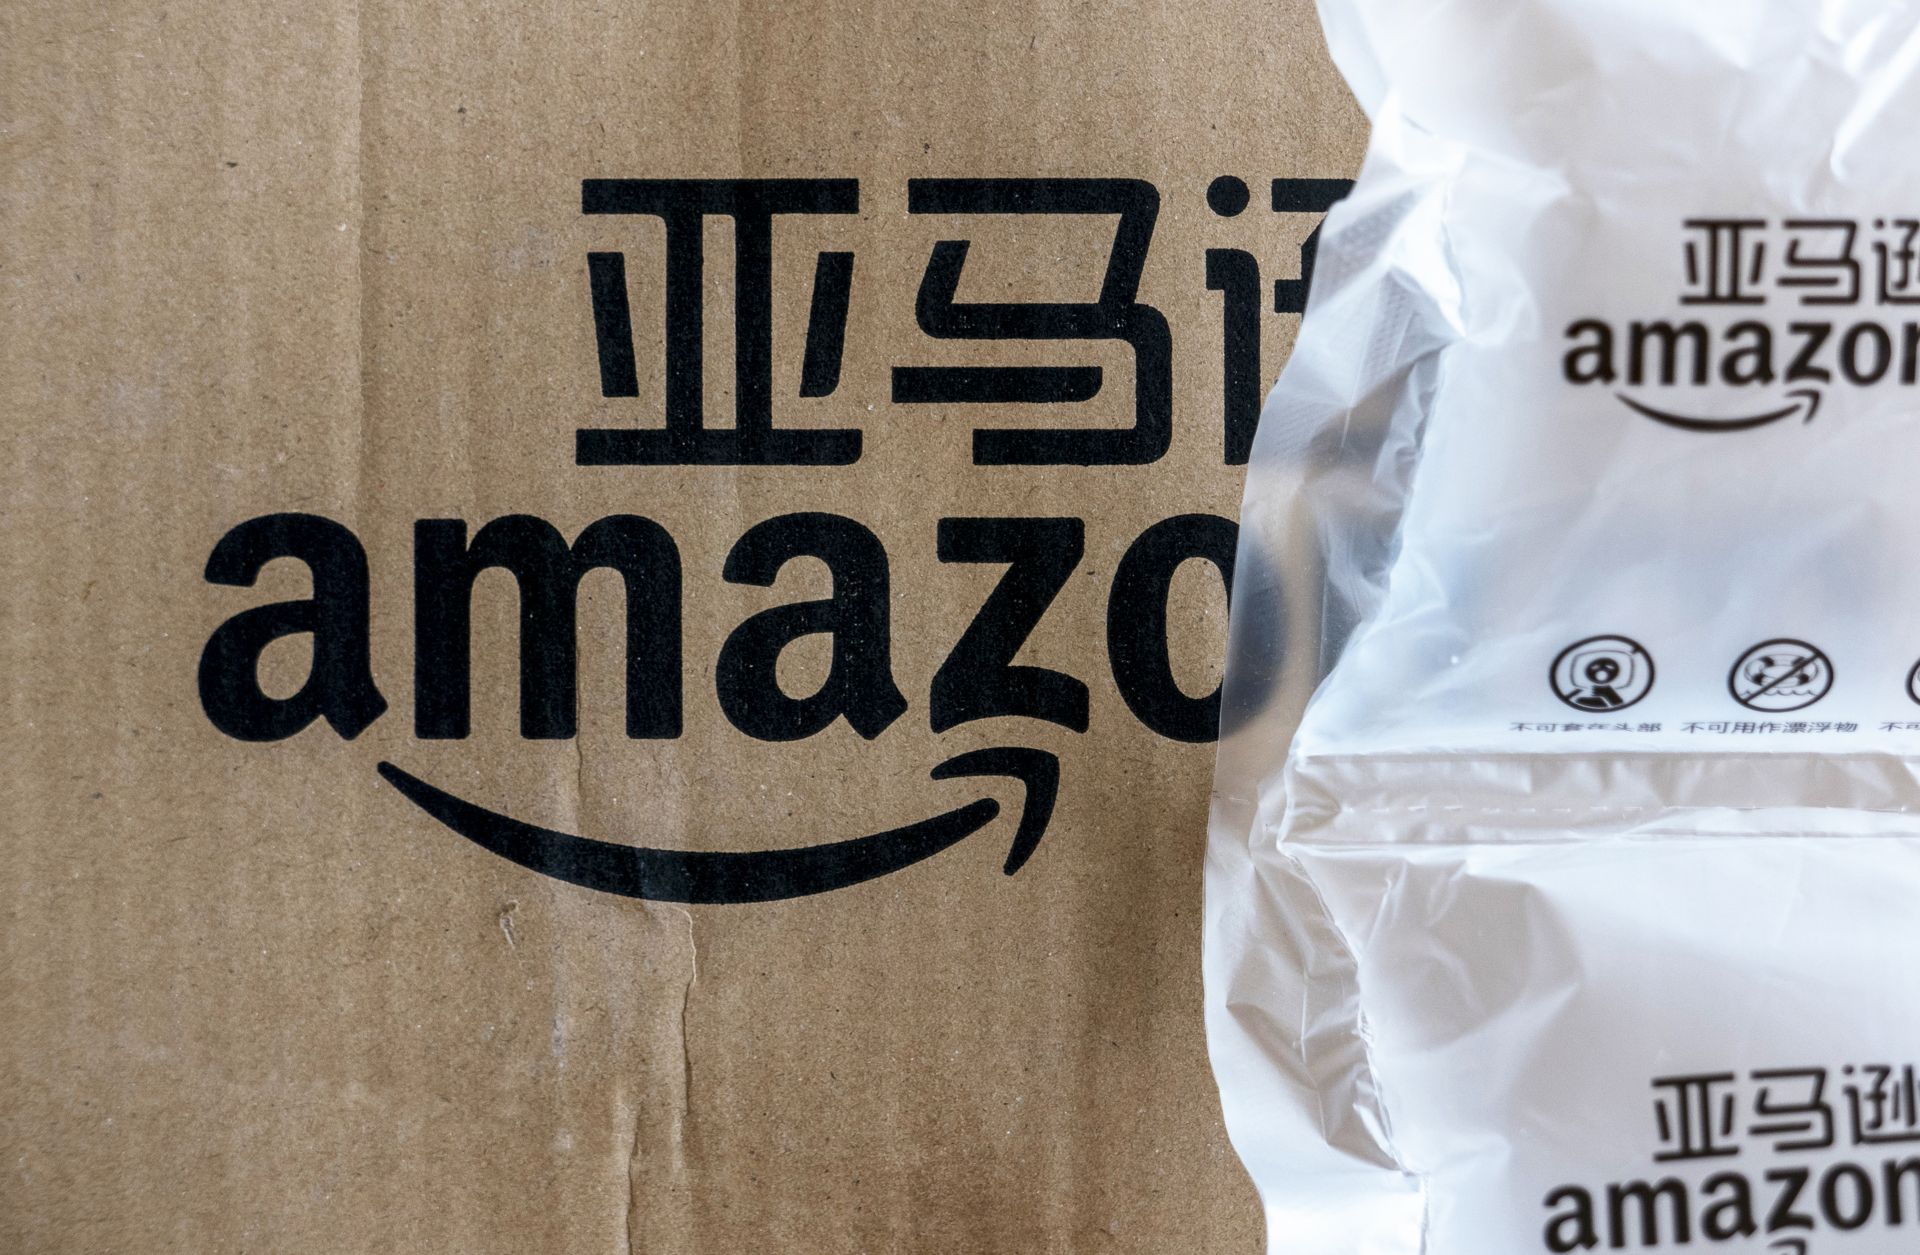 An Amazon.cn package in China.